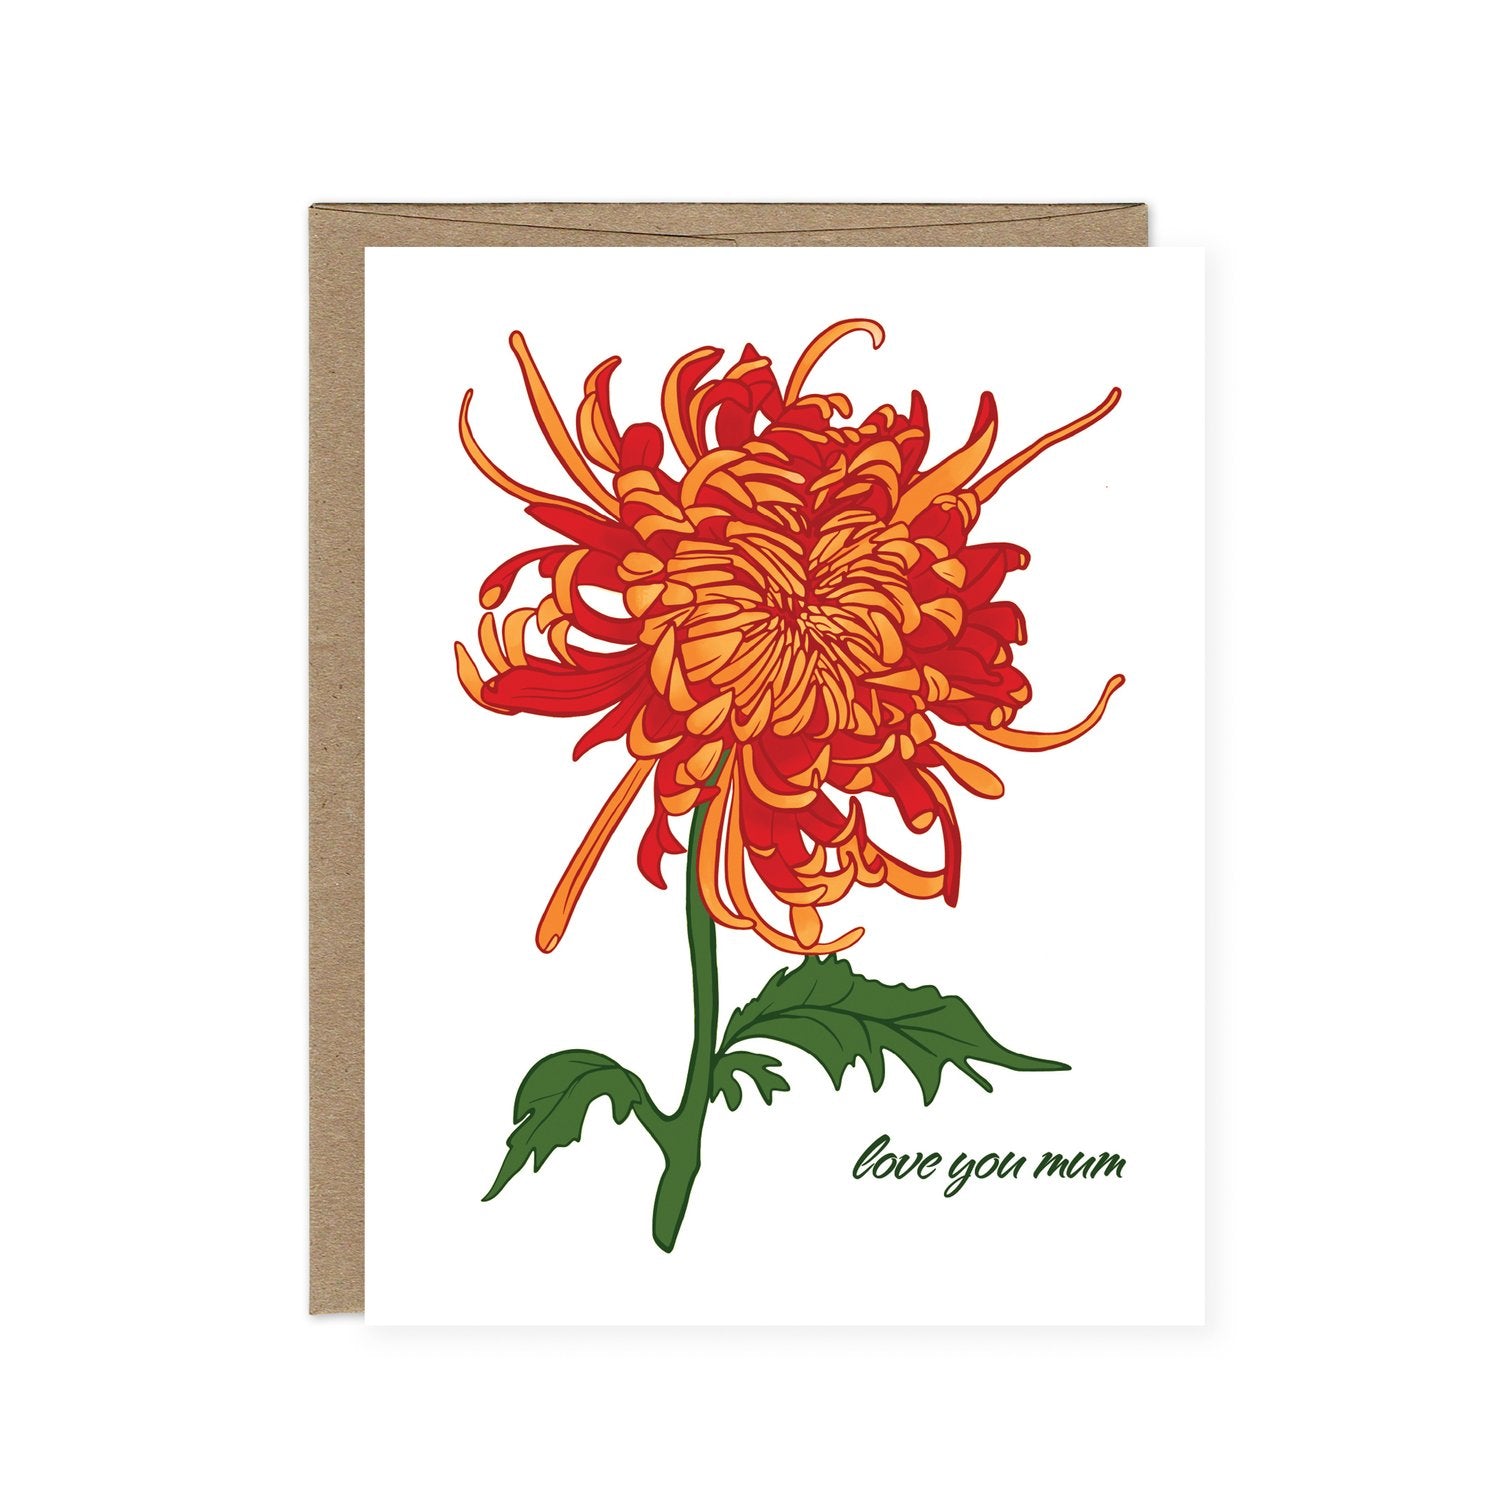 An orange & pink flower on a white card with the words "love you mum" in green